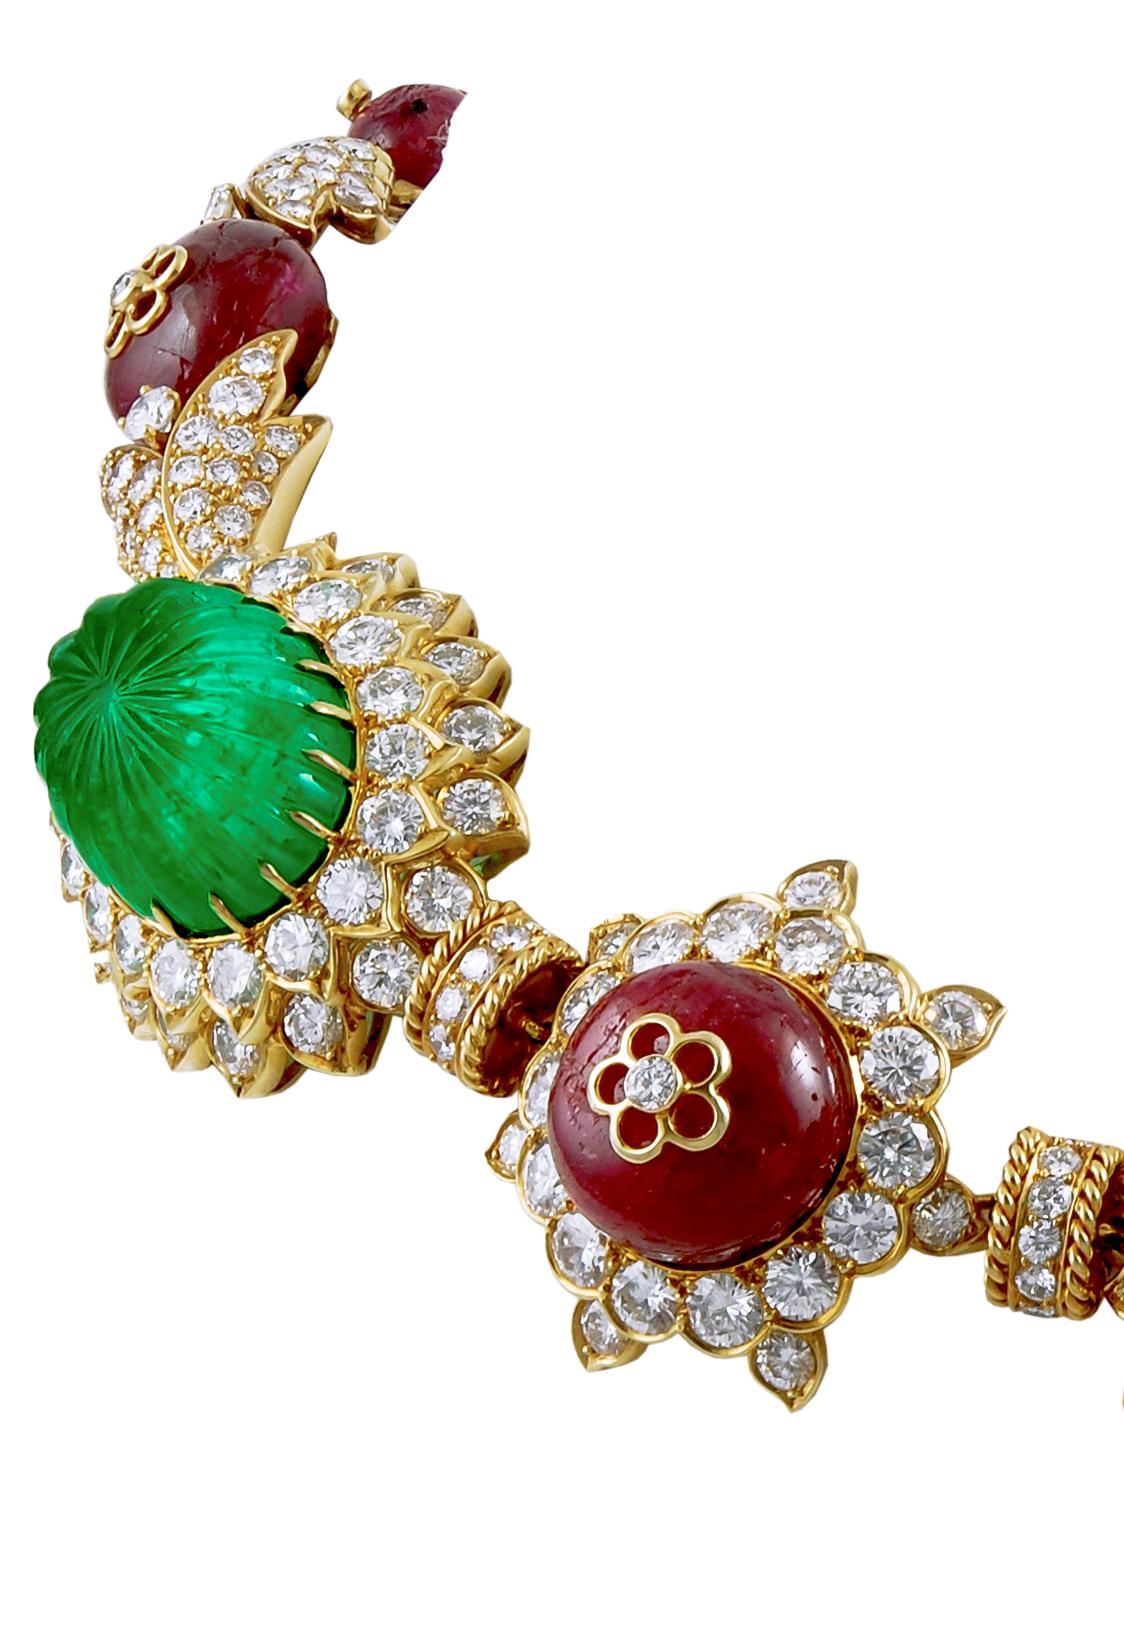 VAN CLEEF & ARPELS Carved Emerald, Ruby, Diamond Necklace-Bracelet Combination

Of Indian inspiration, set at the front with three carved emerald cabochons and four larger ruby beads, the backset with four carved emerald beads alternating with seven